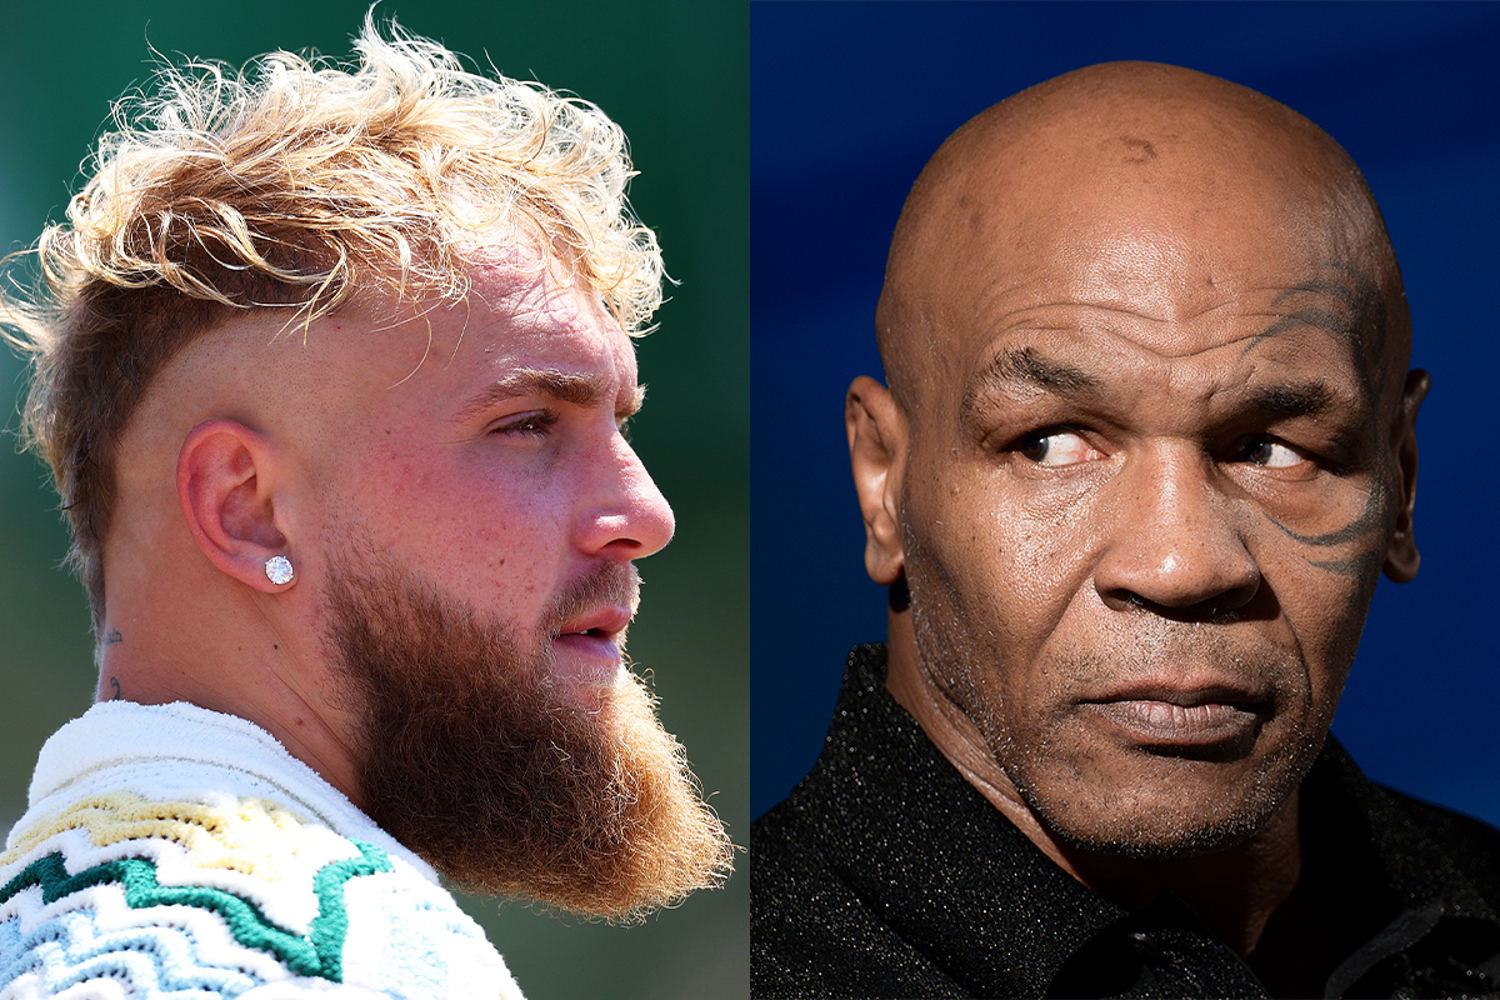 Jake Paul vs. Mike Tyson on July 20 to be sanctioned, professional boxing fight 